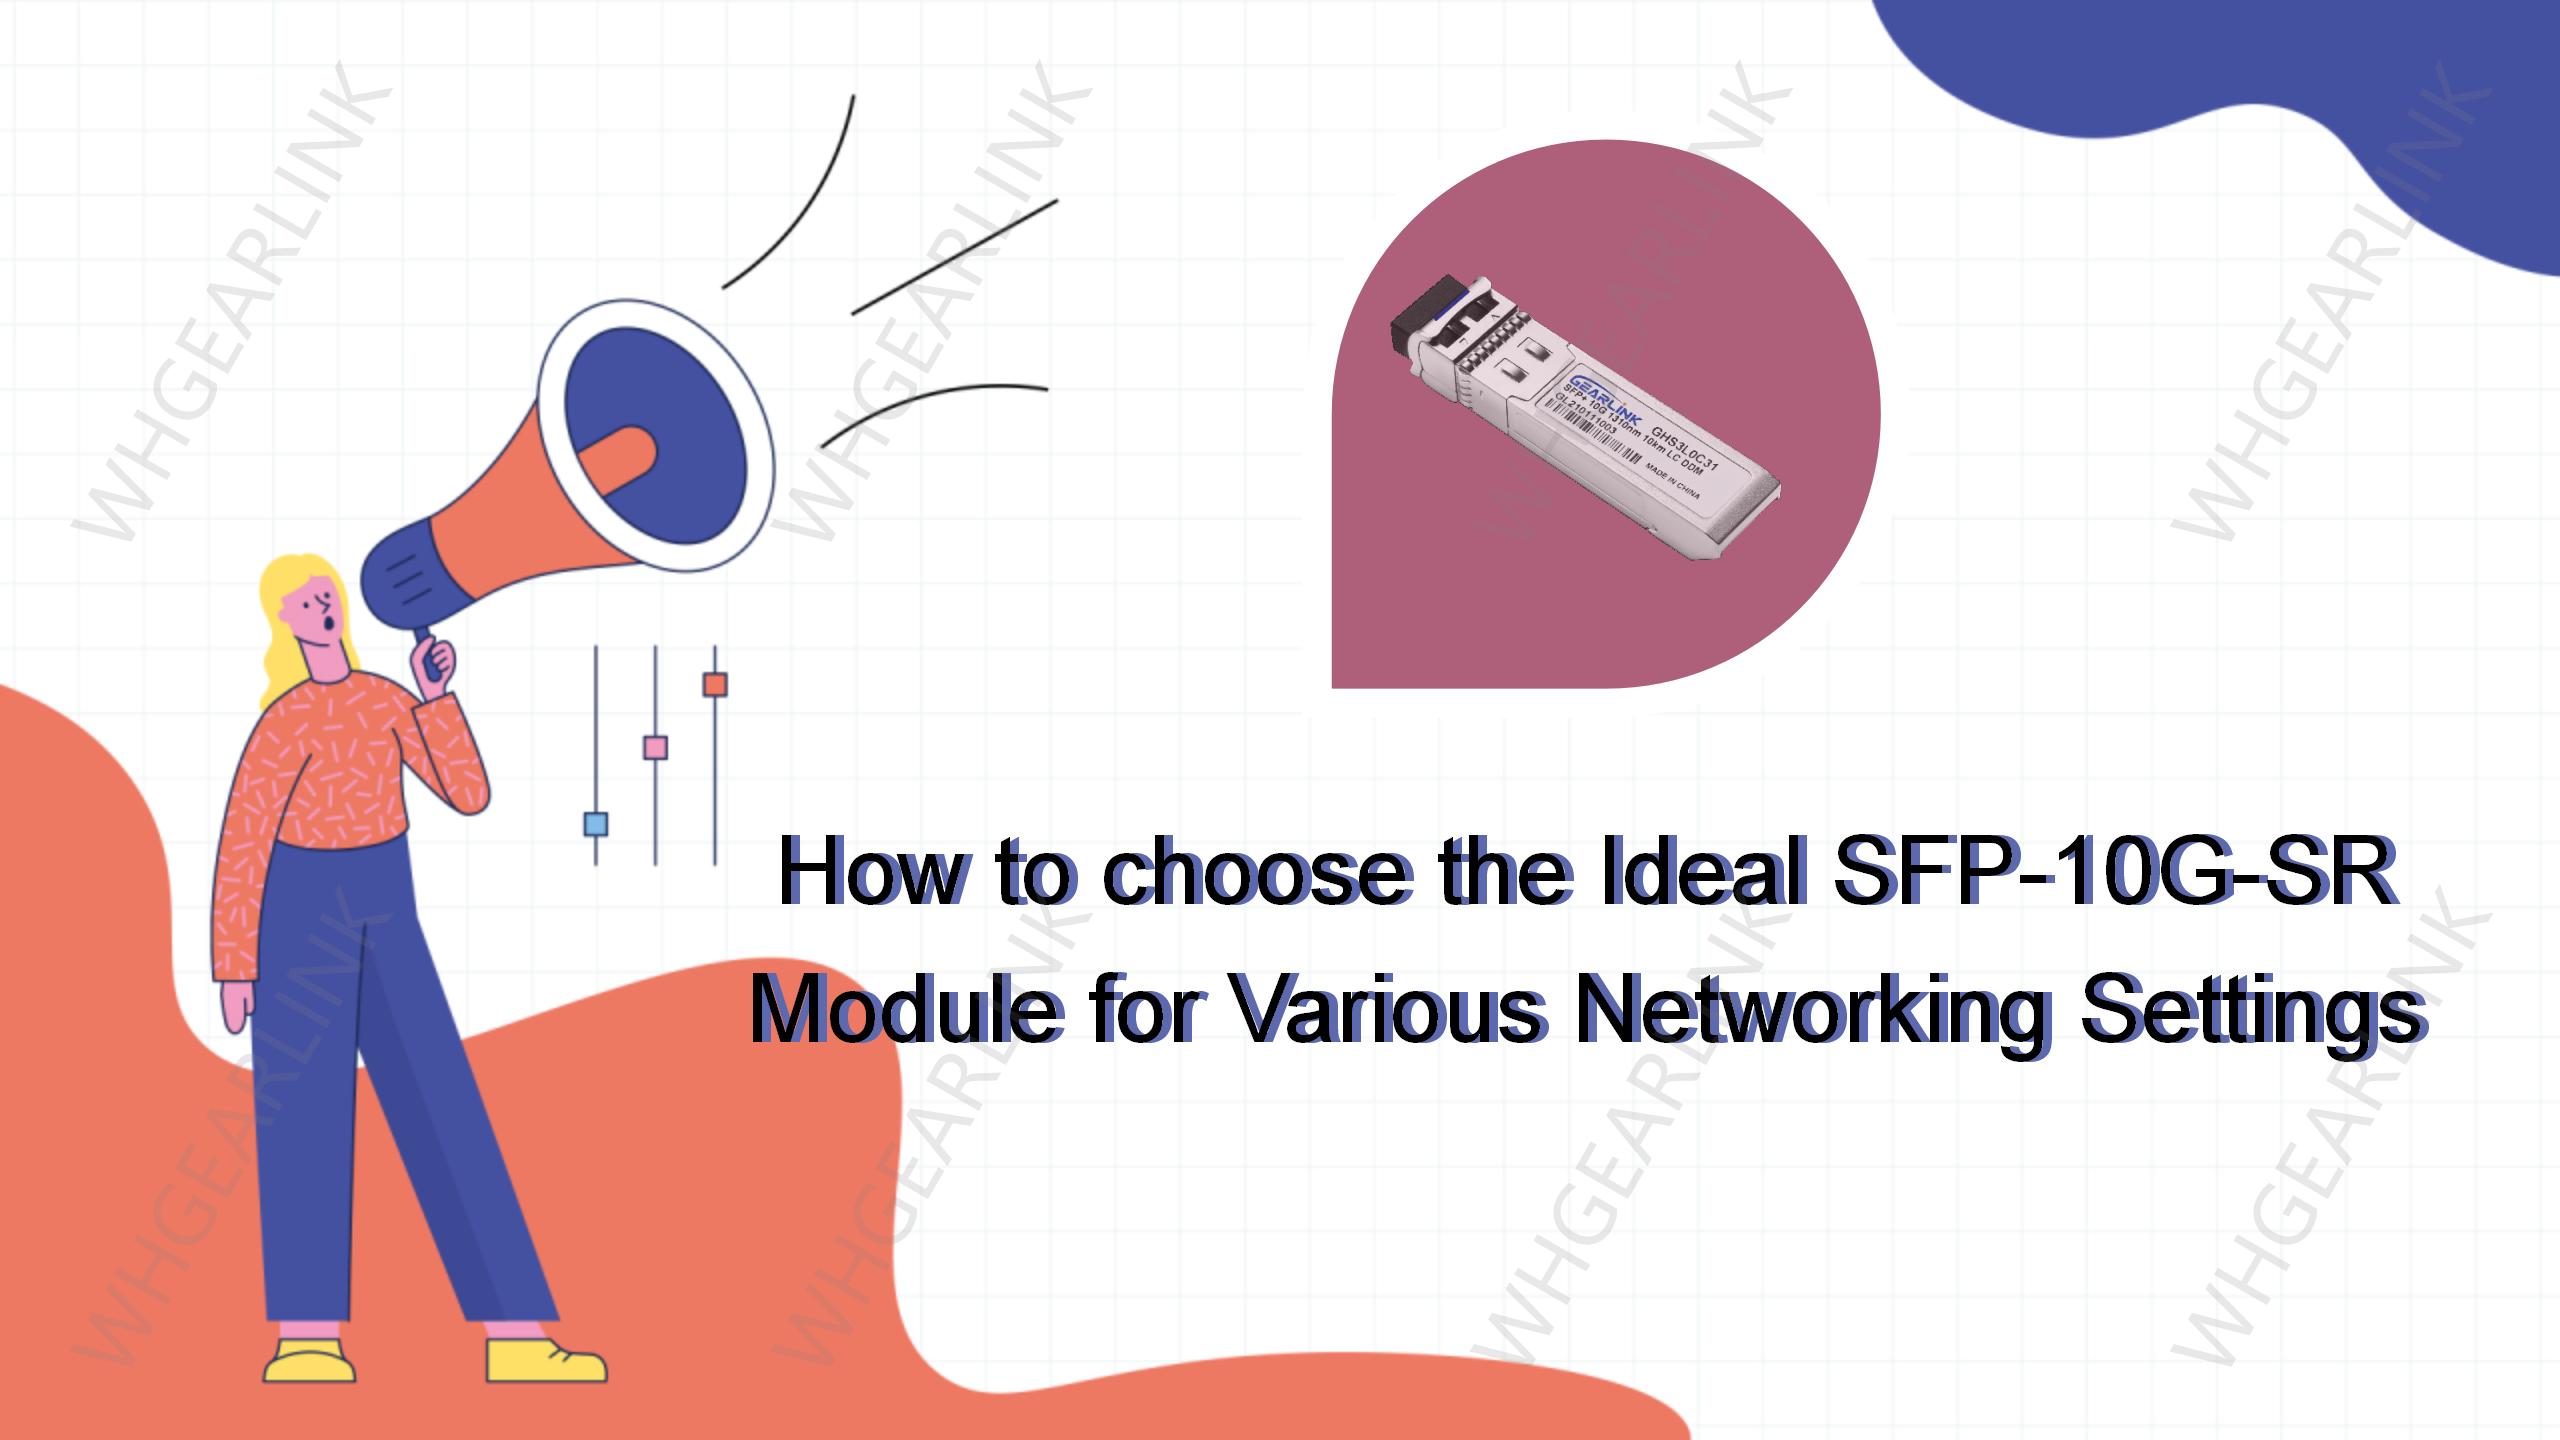 How to choose the Ideal SFP-10G-SR Module for Various Networking Settings